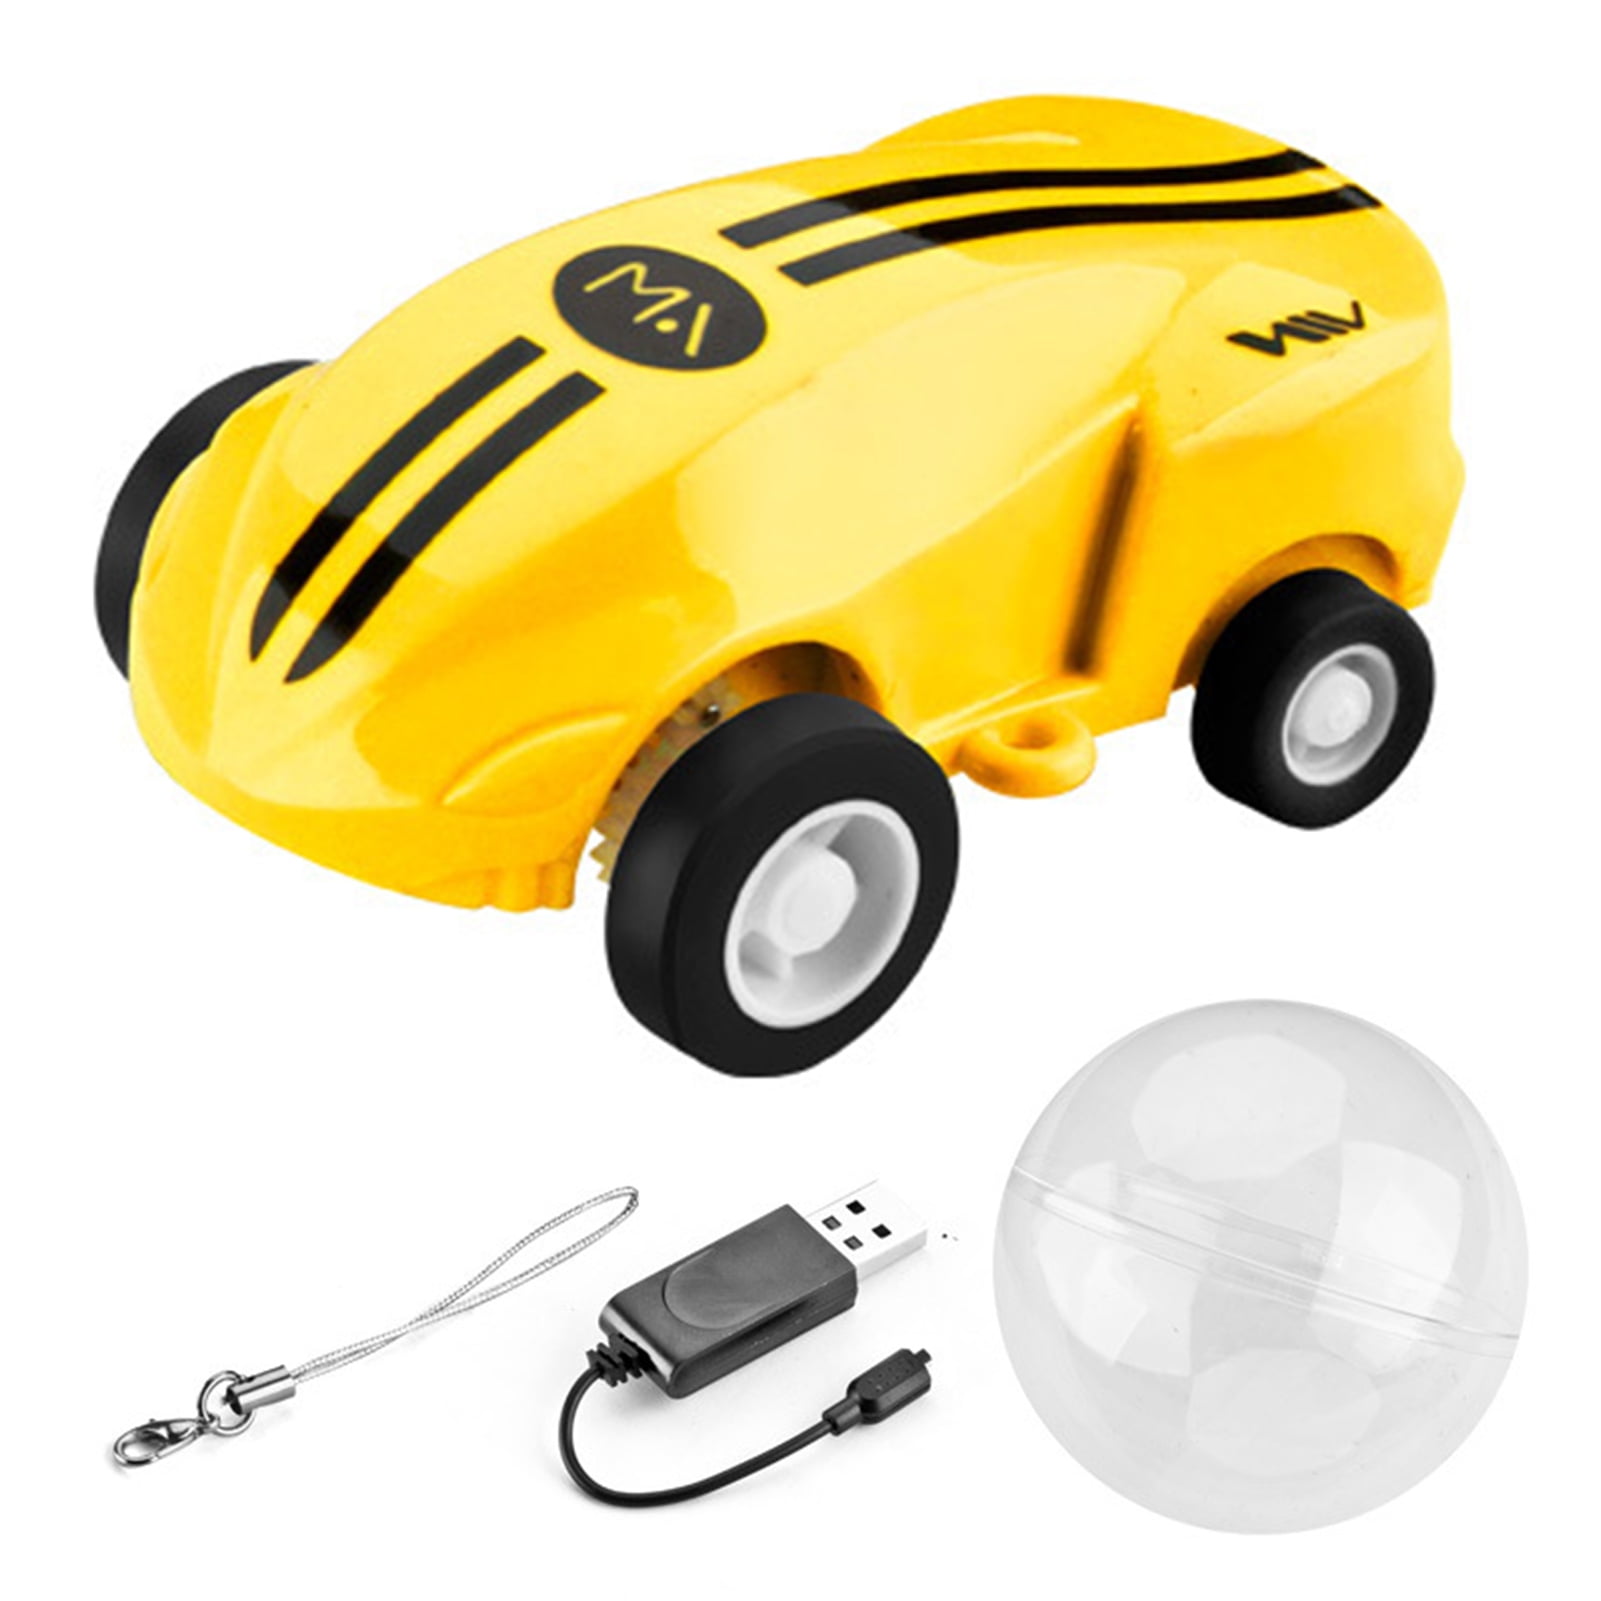 Details about   CW_ KE_  Rechargeable Stunt Car 360 Degree Rotating Pocket Racer with LED Light 